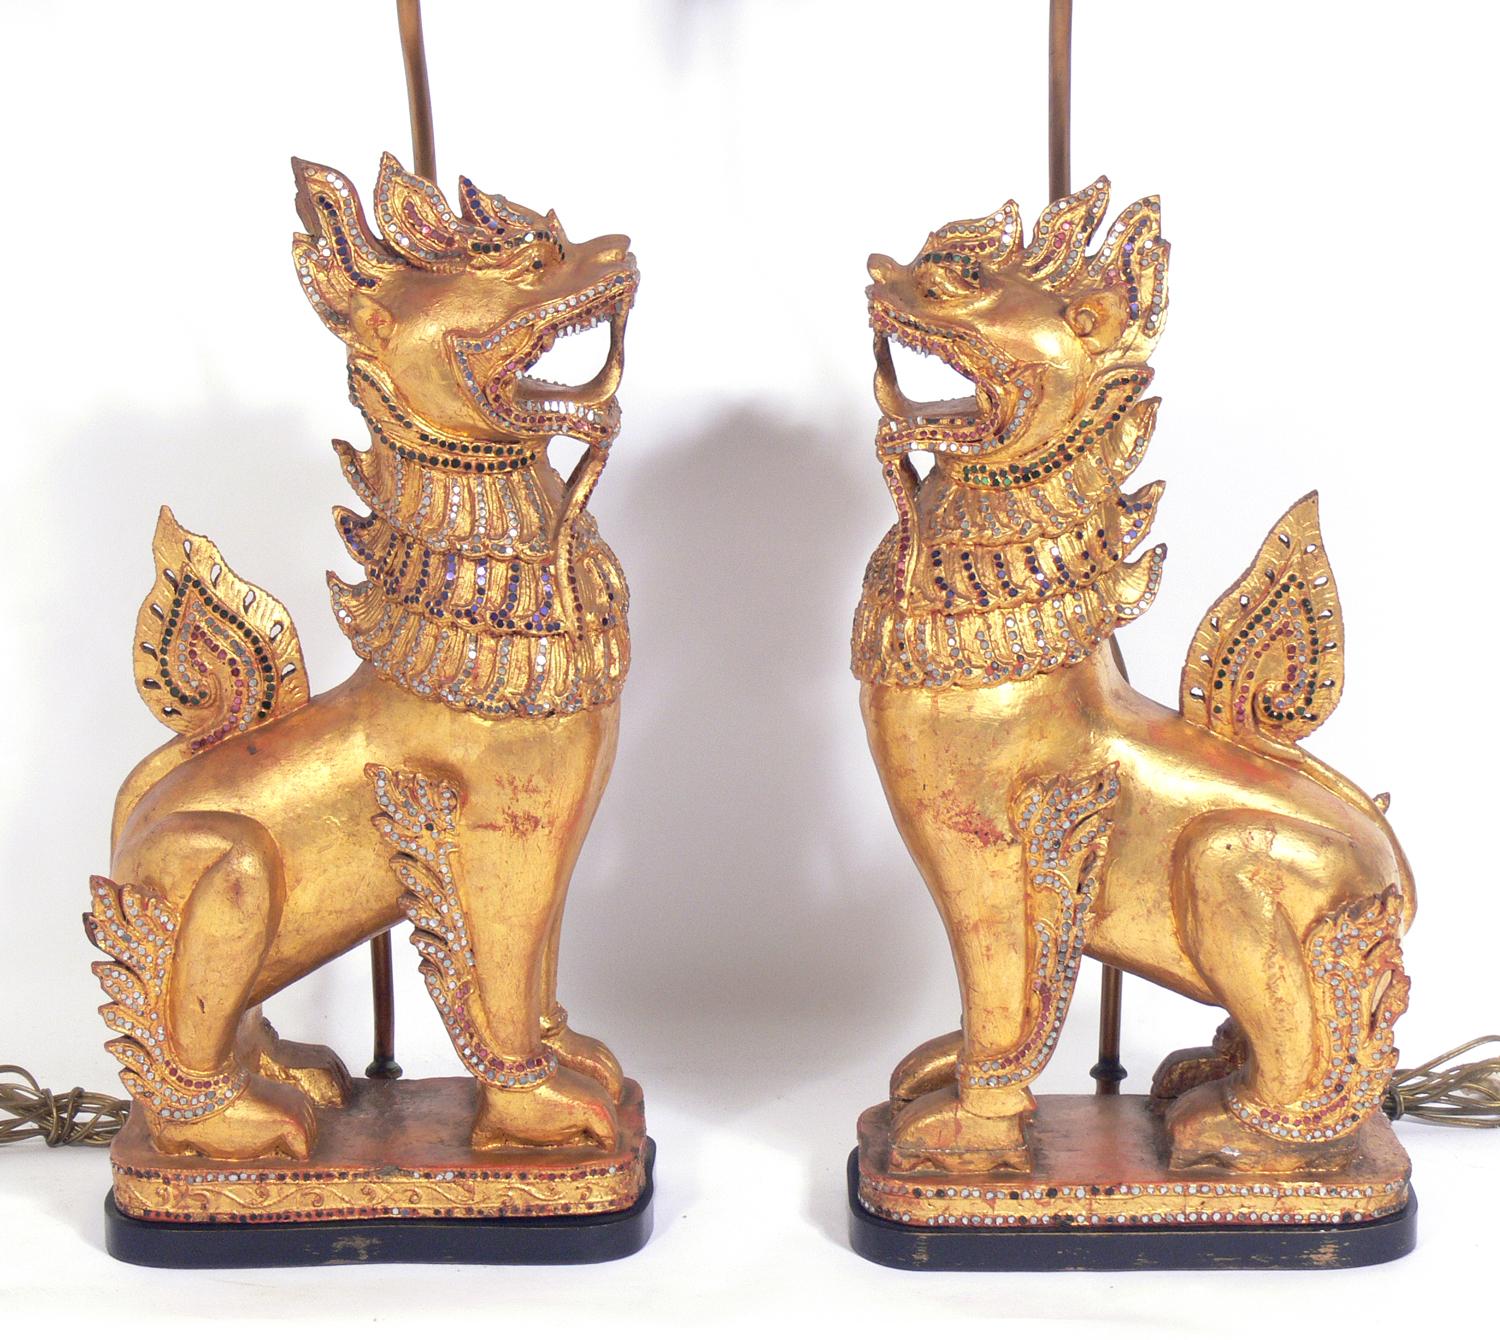 Pair of gilt Foo dog lamps, in the manner of Tony Duquette, circa 1940s. The foo dogs themselves probably originate from Thailand and may be much earlier than the 1940s when they were made into lamps. The price noted below includes the shades. They